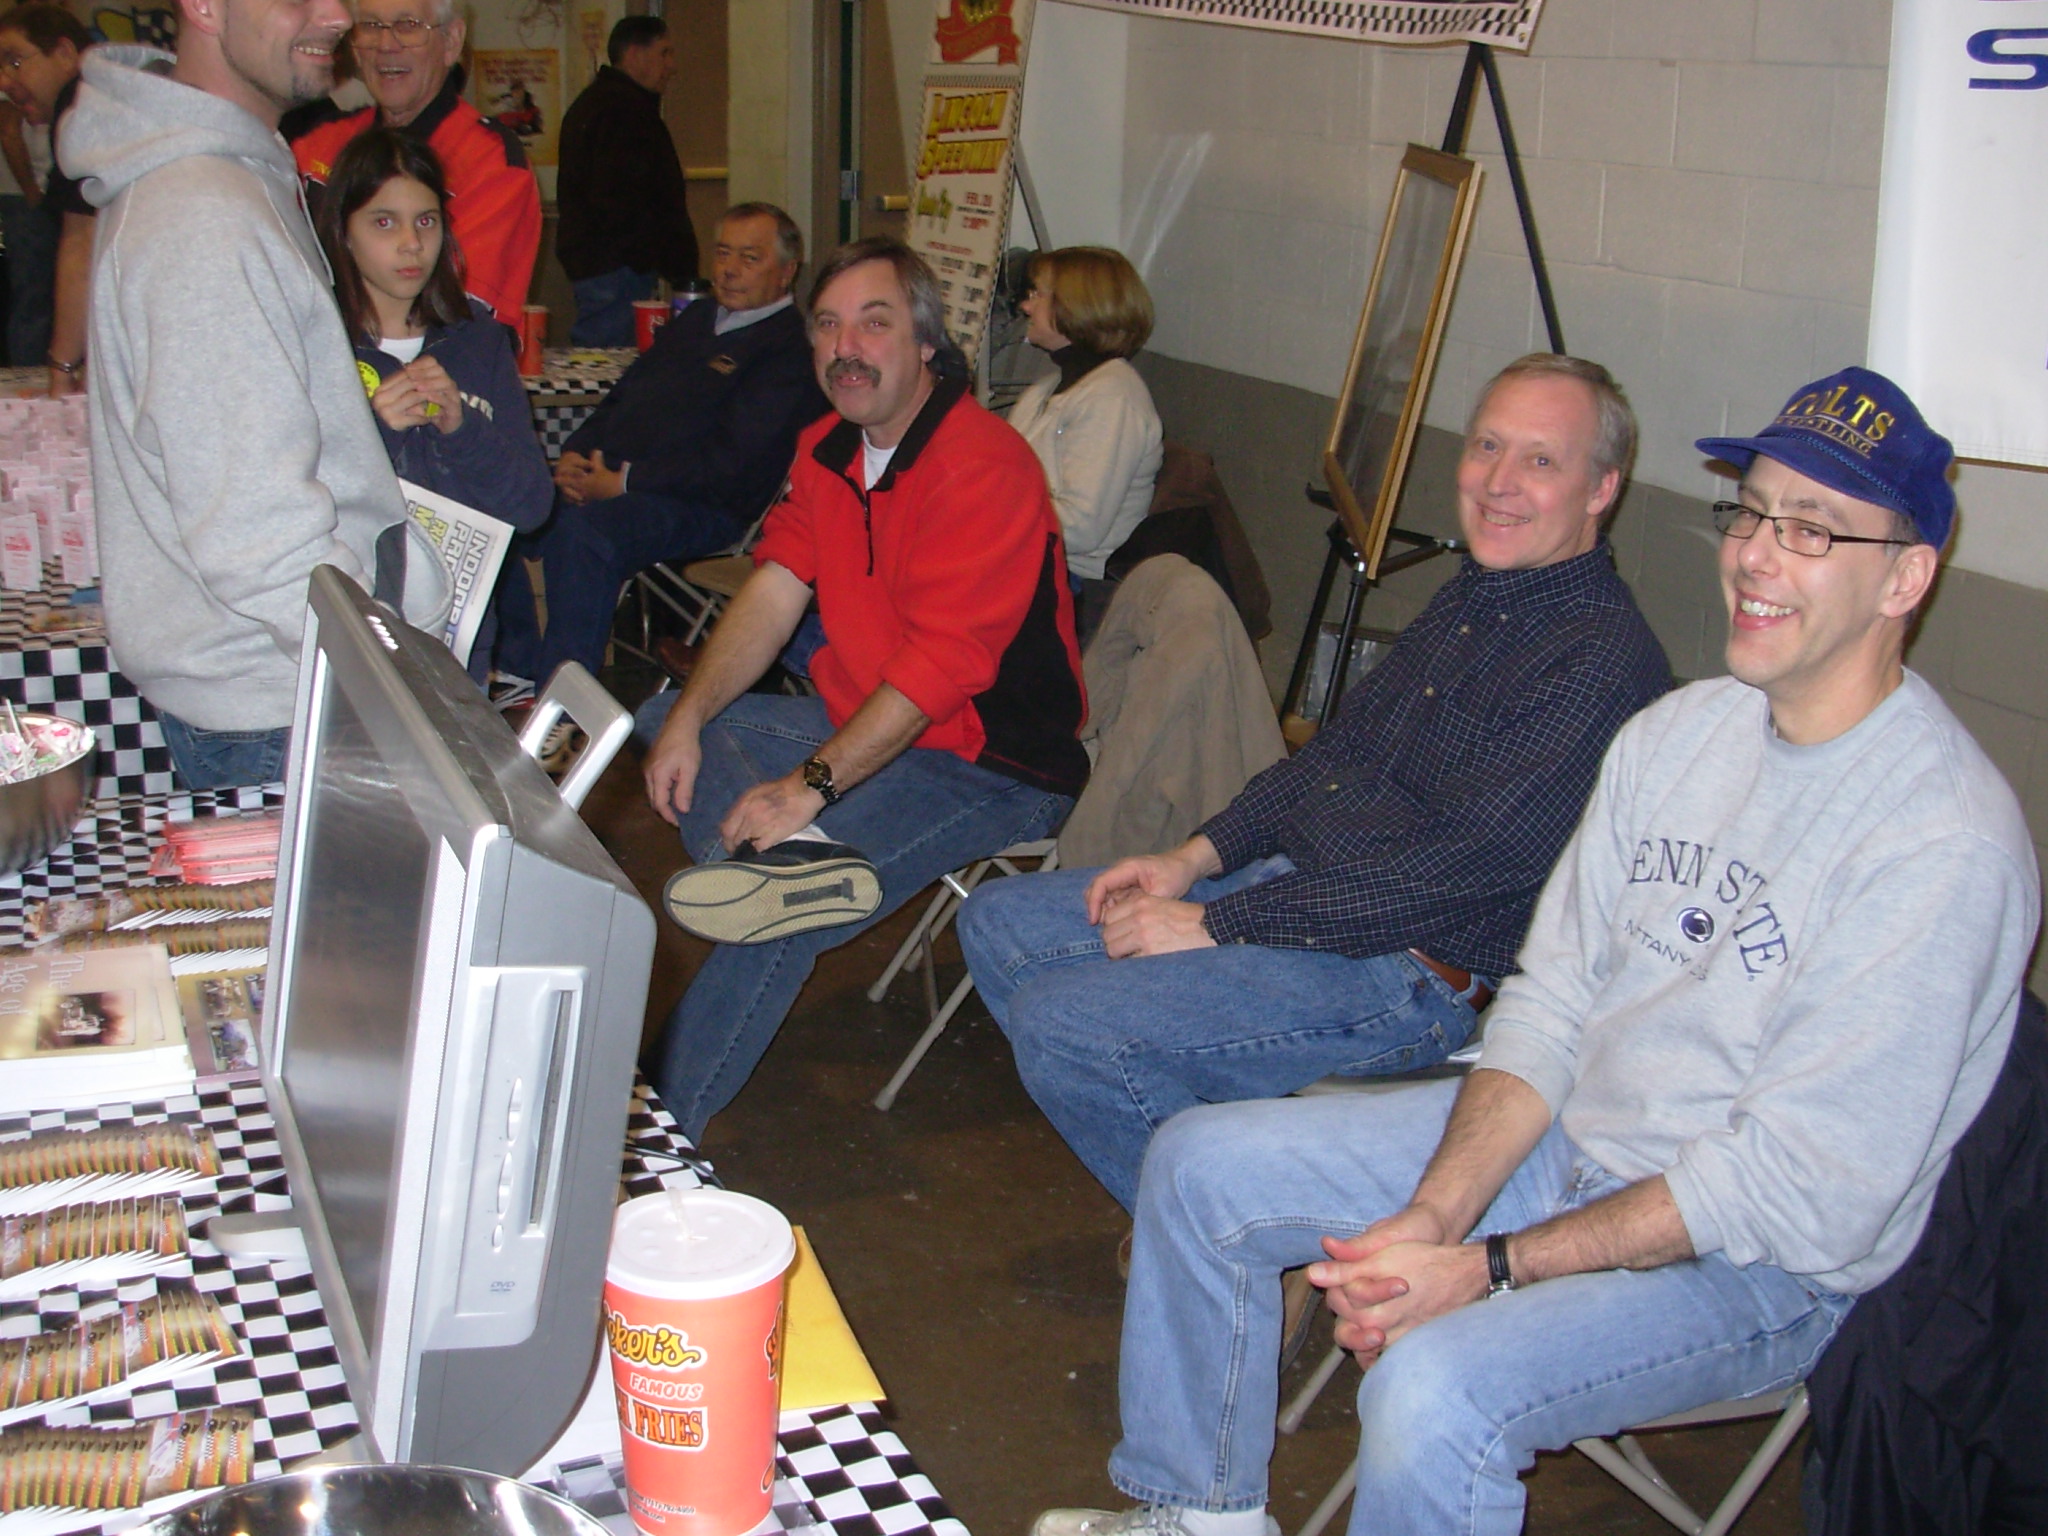 The Williams Grove and Lincoln gang have fun at the show...
